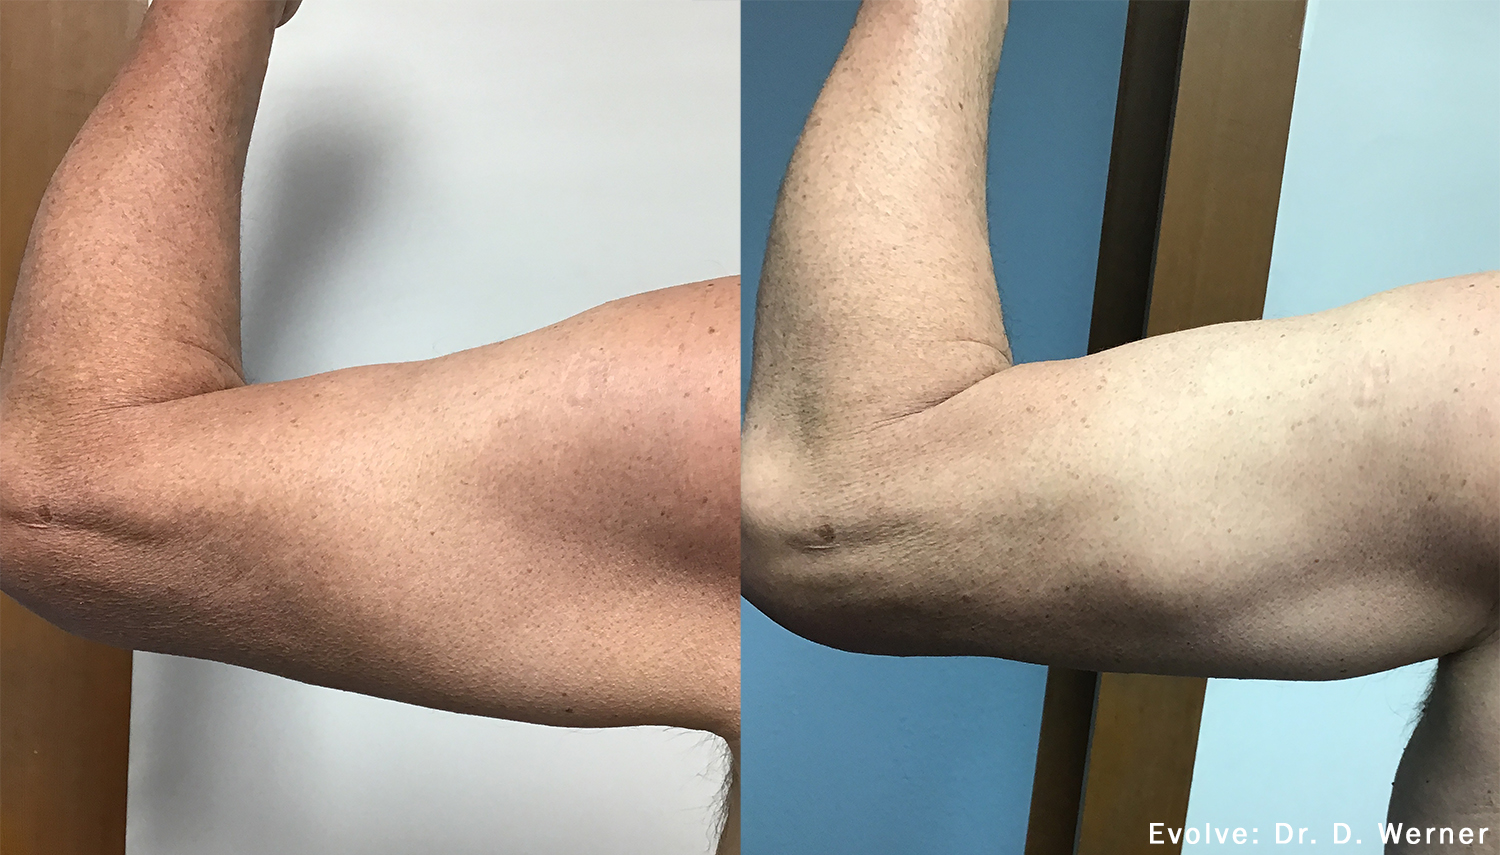  EvolveX Before and After Arms